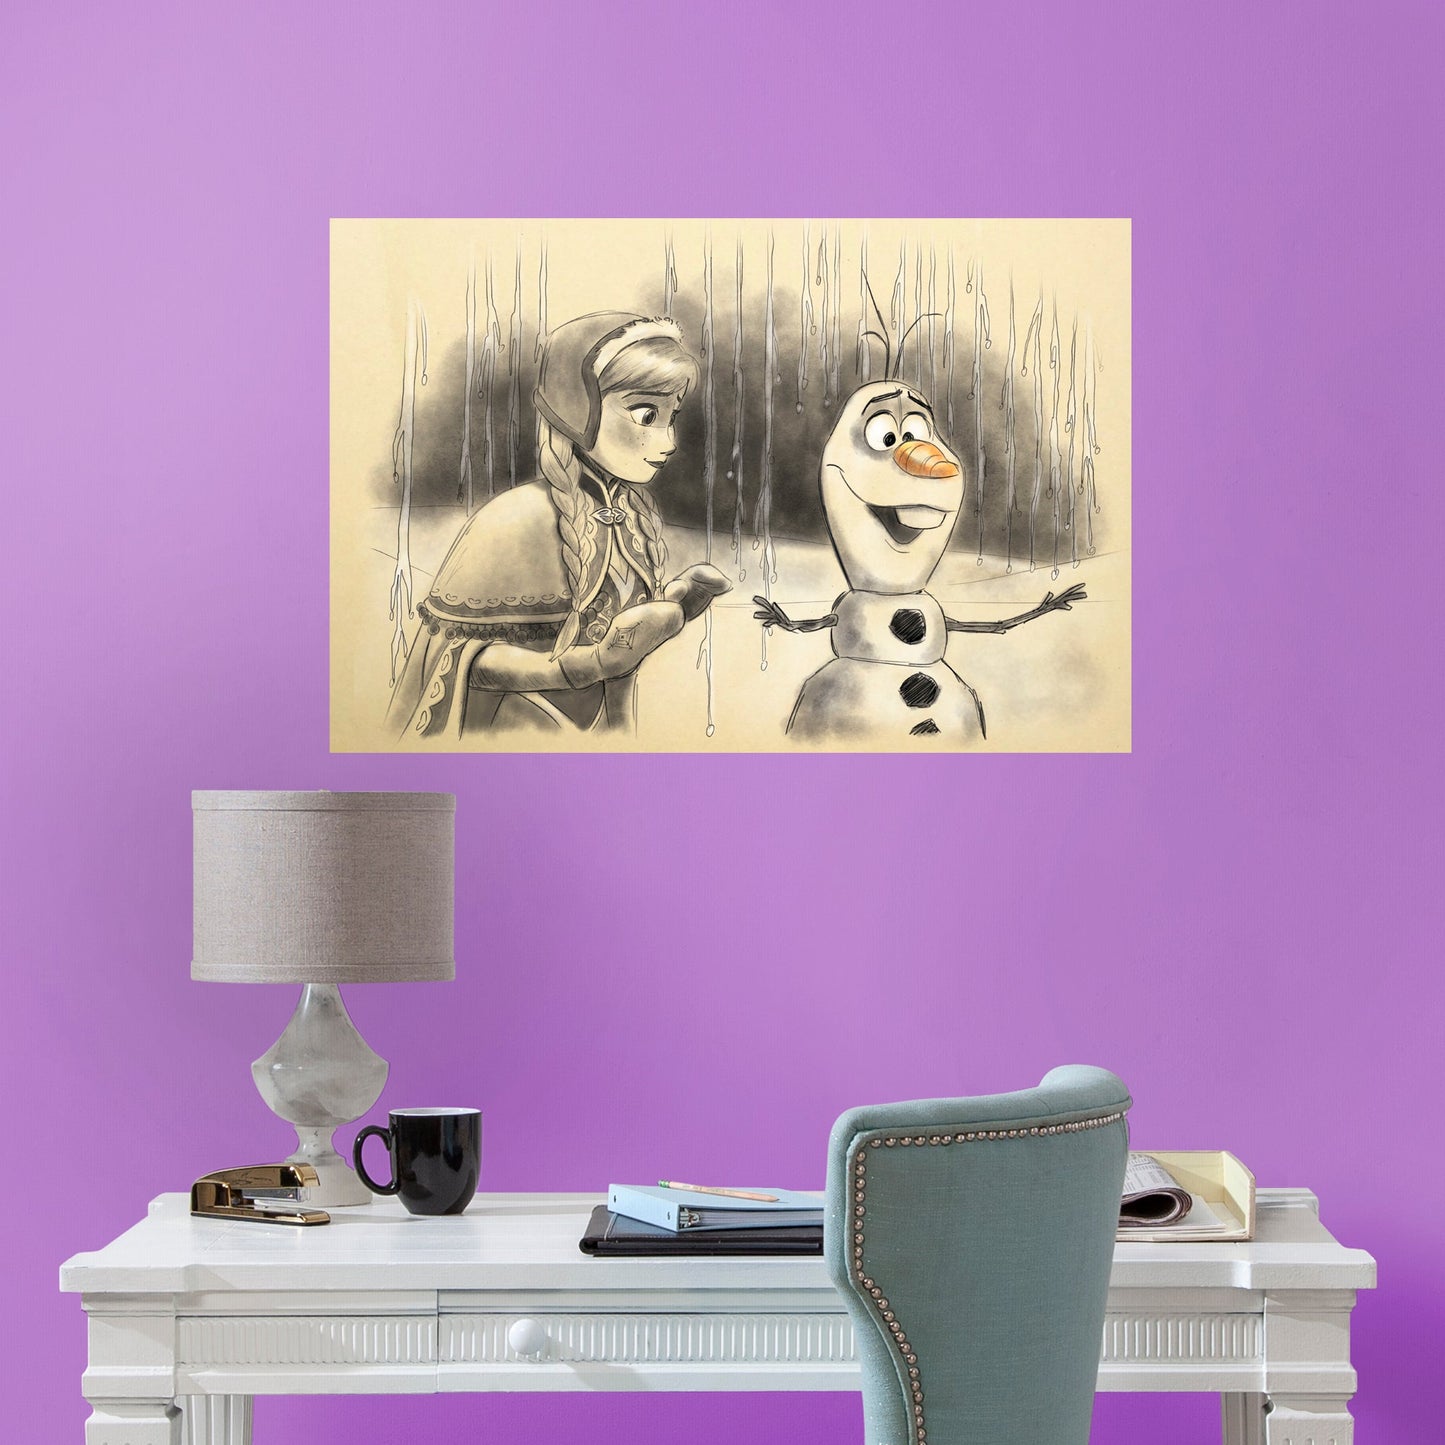 Once Upon A Snowman: Olaf and Anna Frozen Mural        - Officially Licensed Disney Removable Wall   Adhesive Decal